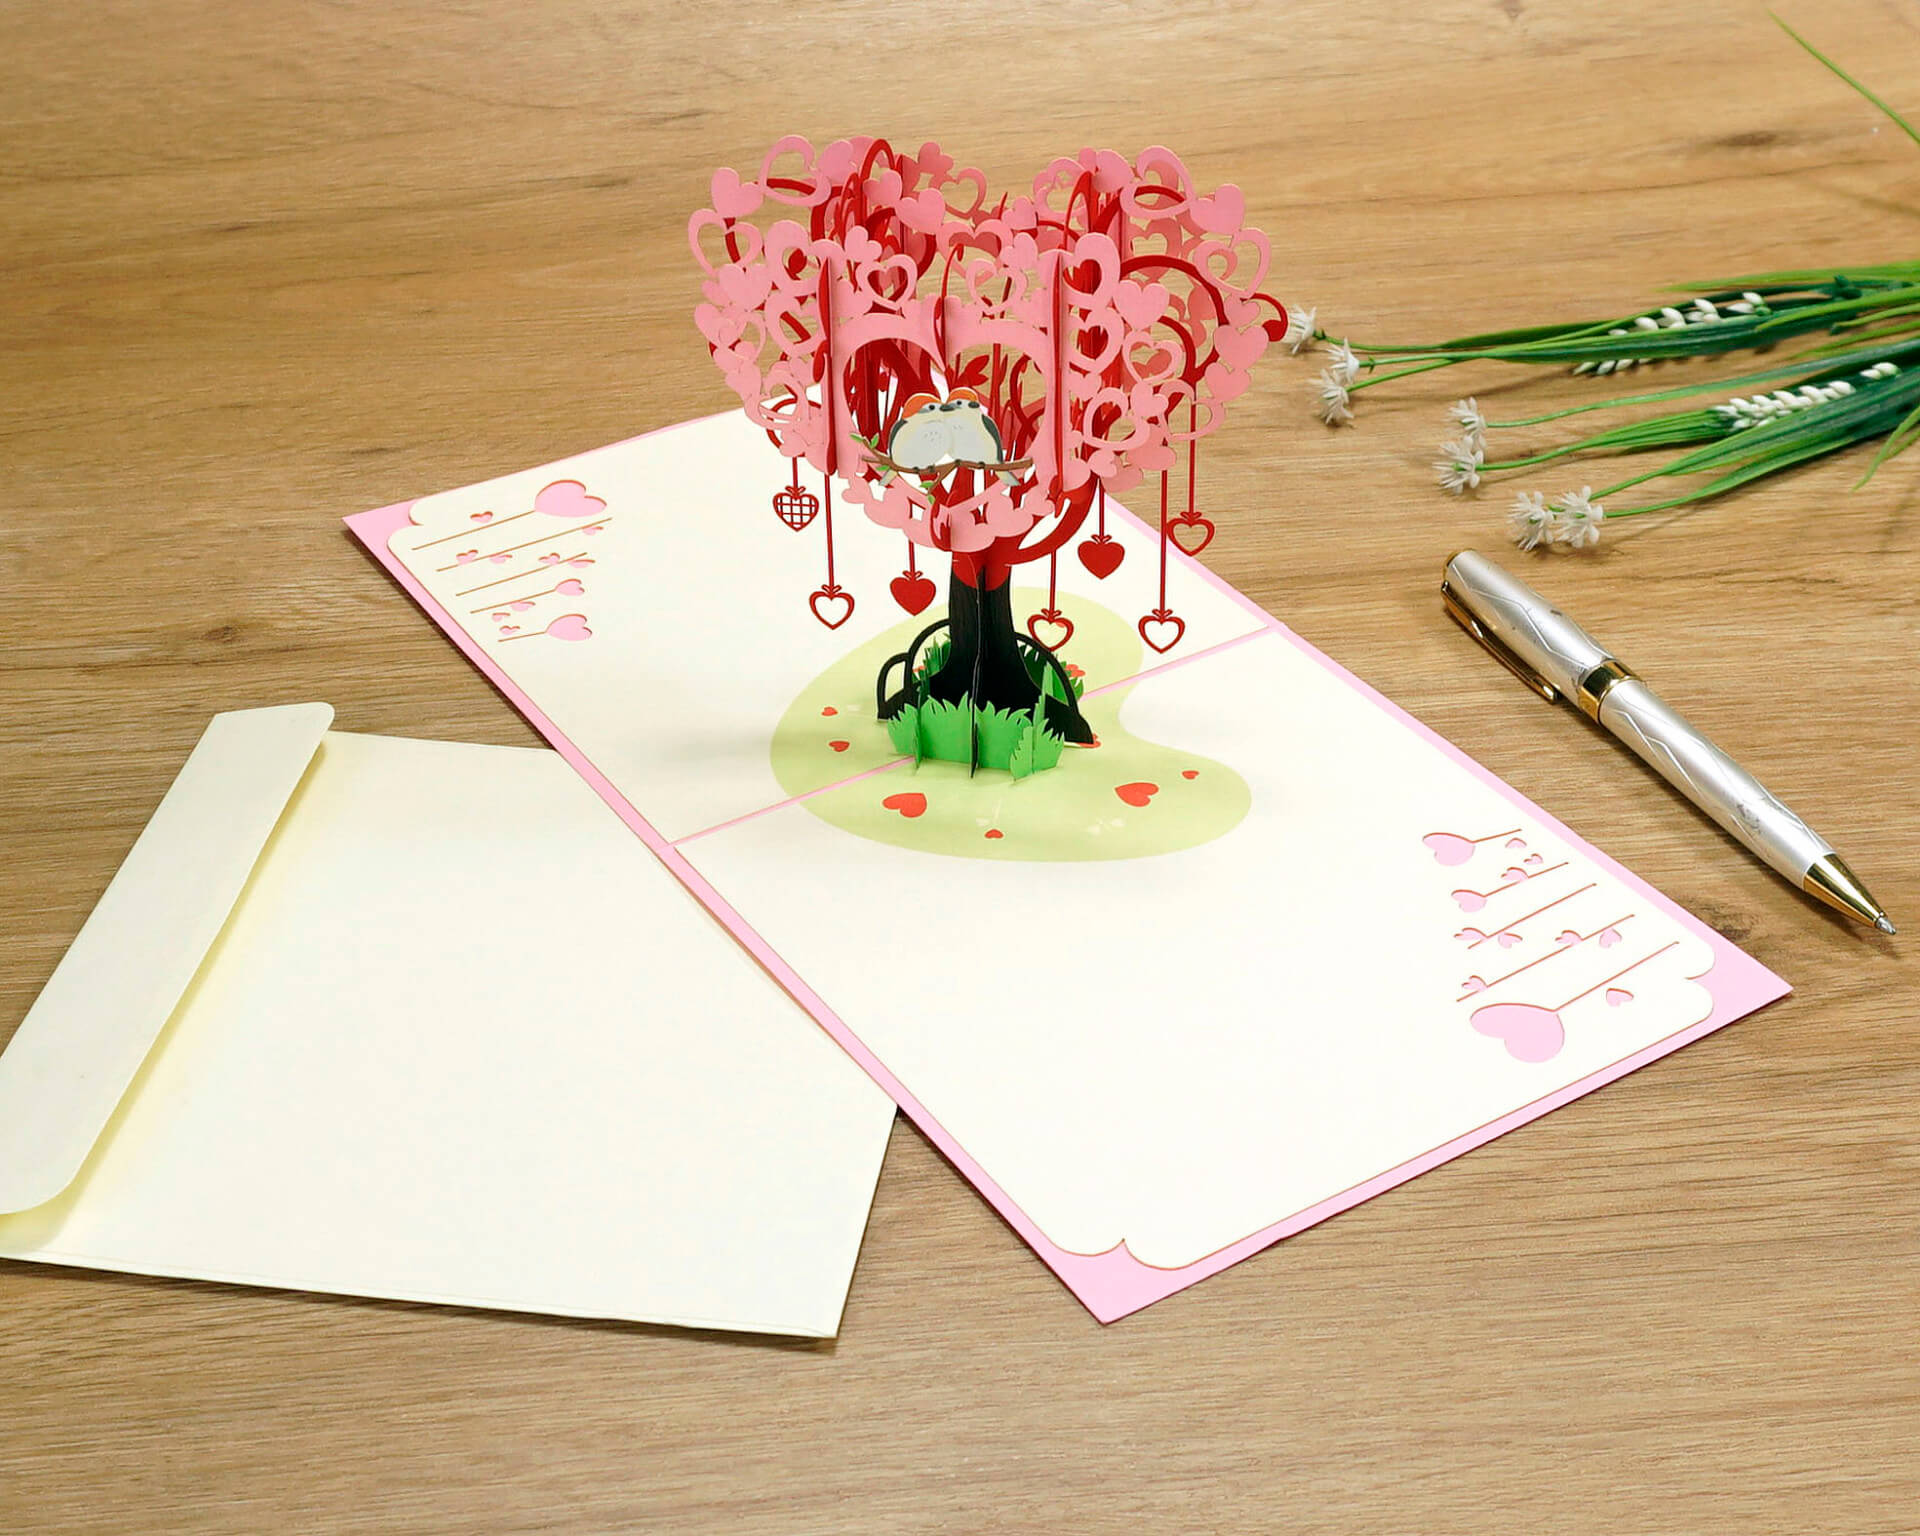 special 3D popup cards fỏ mother